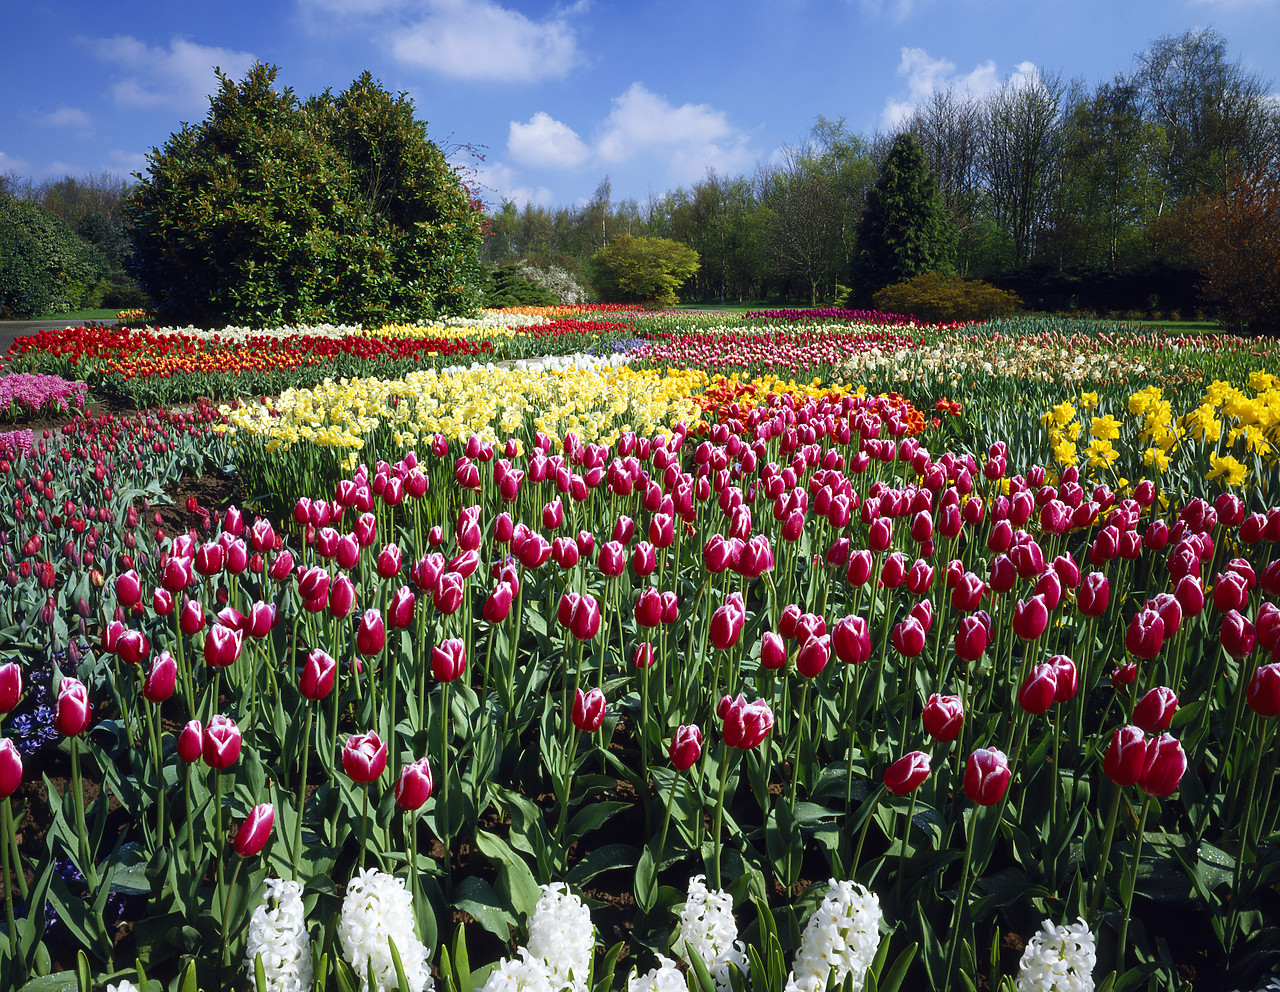 #892075-1 - Spring Gardens at Springfields, Spaulding, Lincolnshire, England